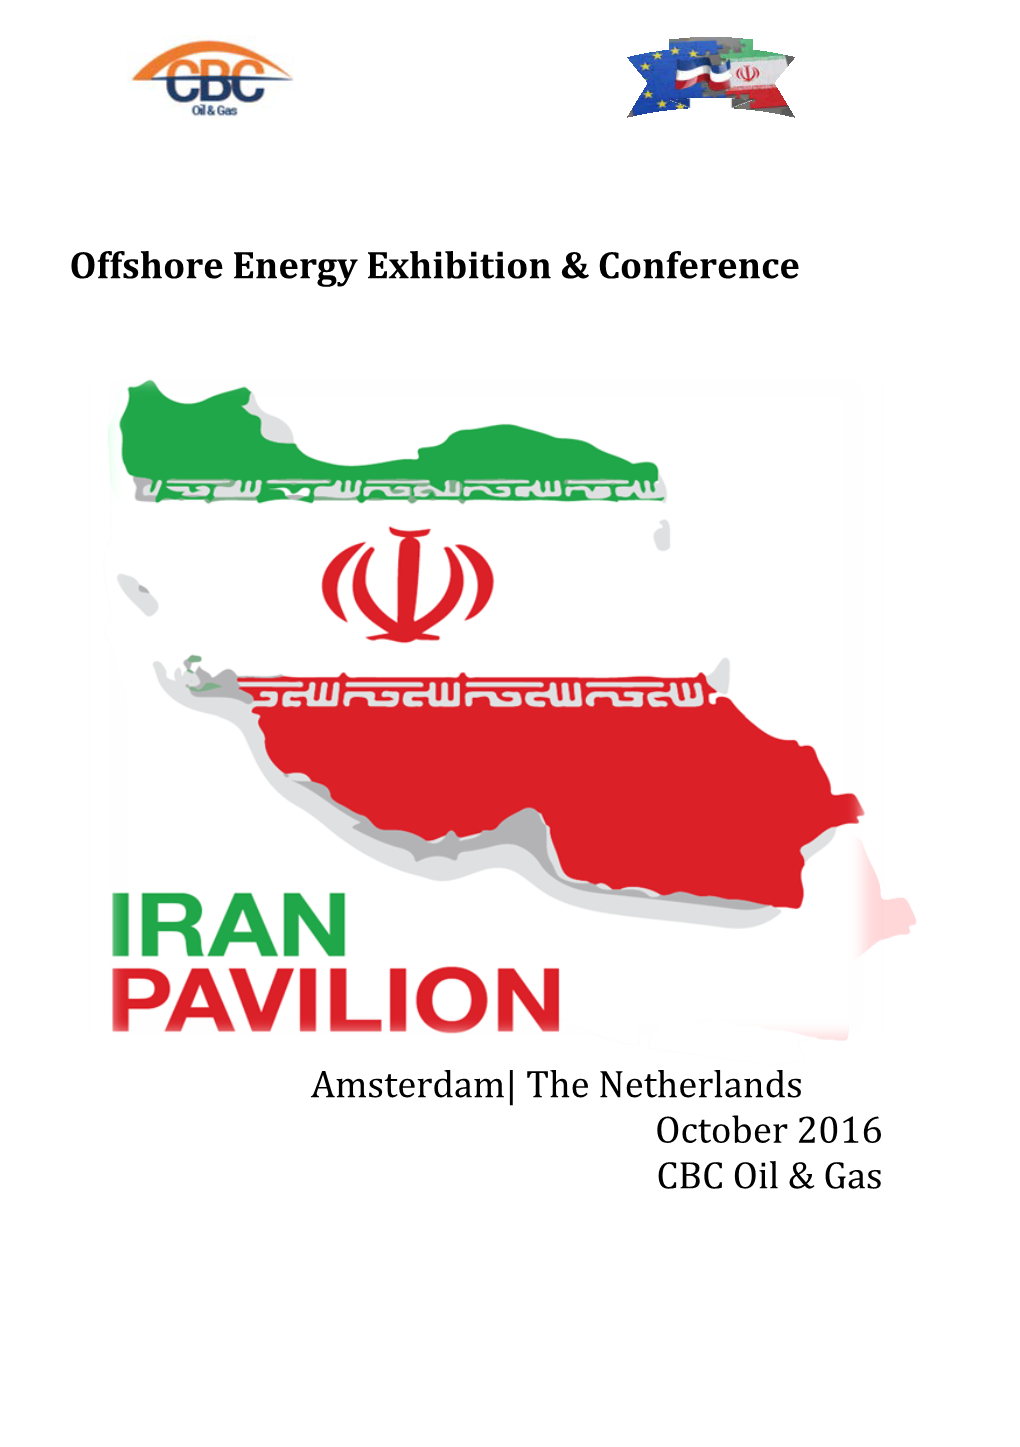 Offshore Energy Exhibition & Conference Amsterdam| The